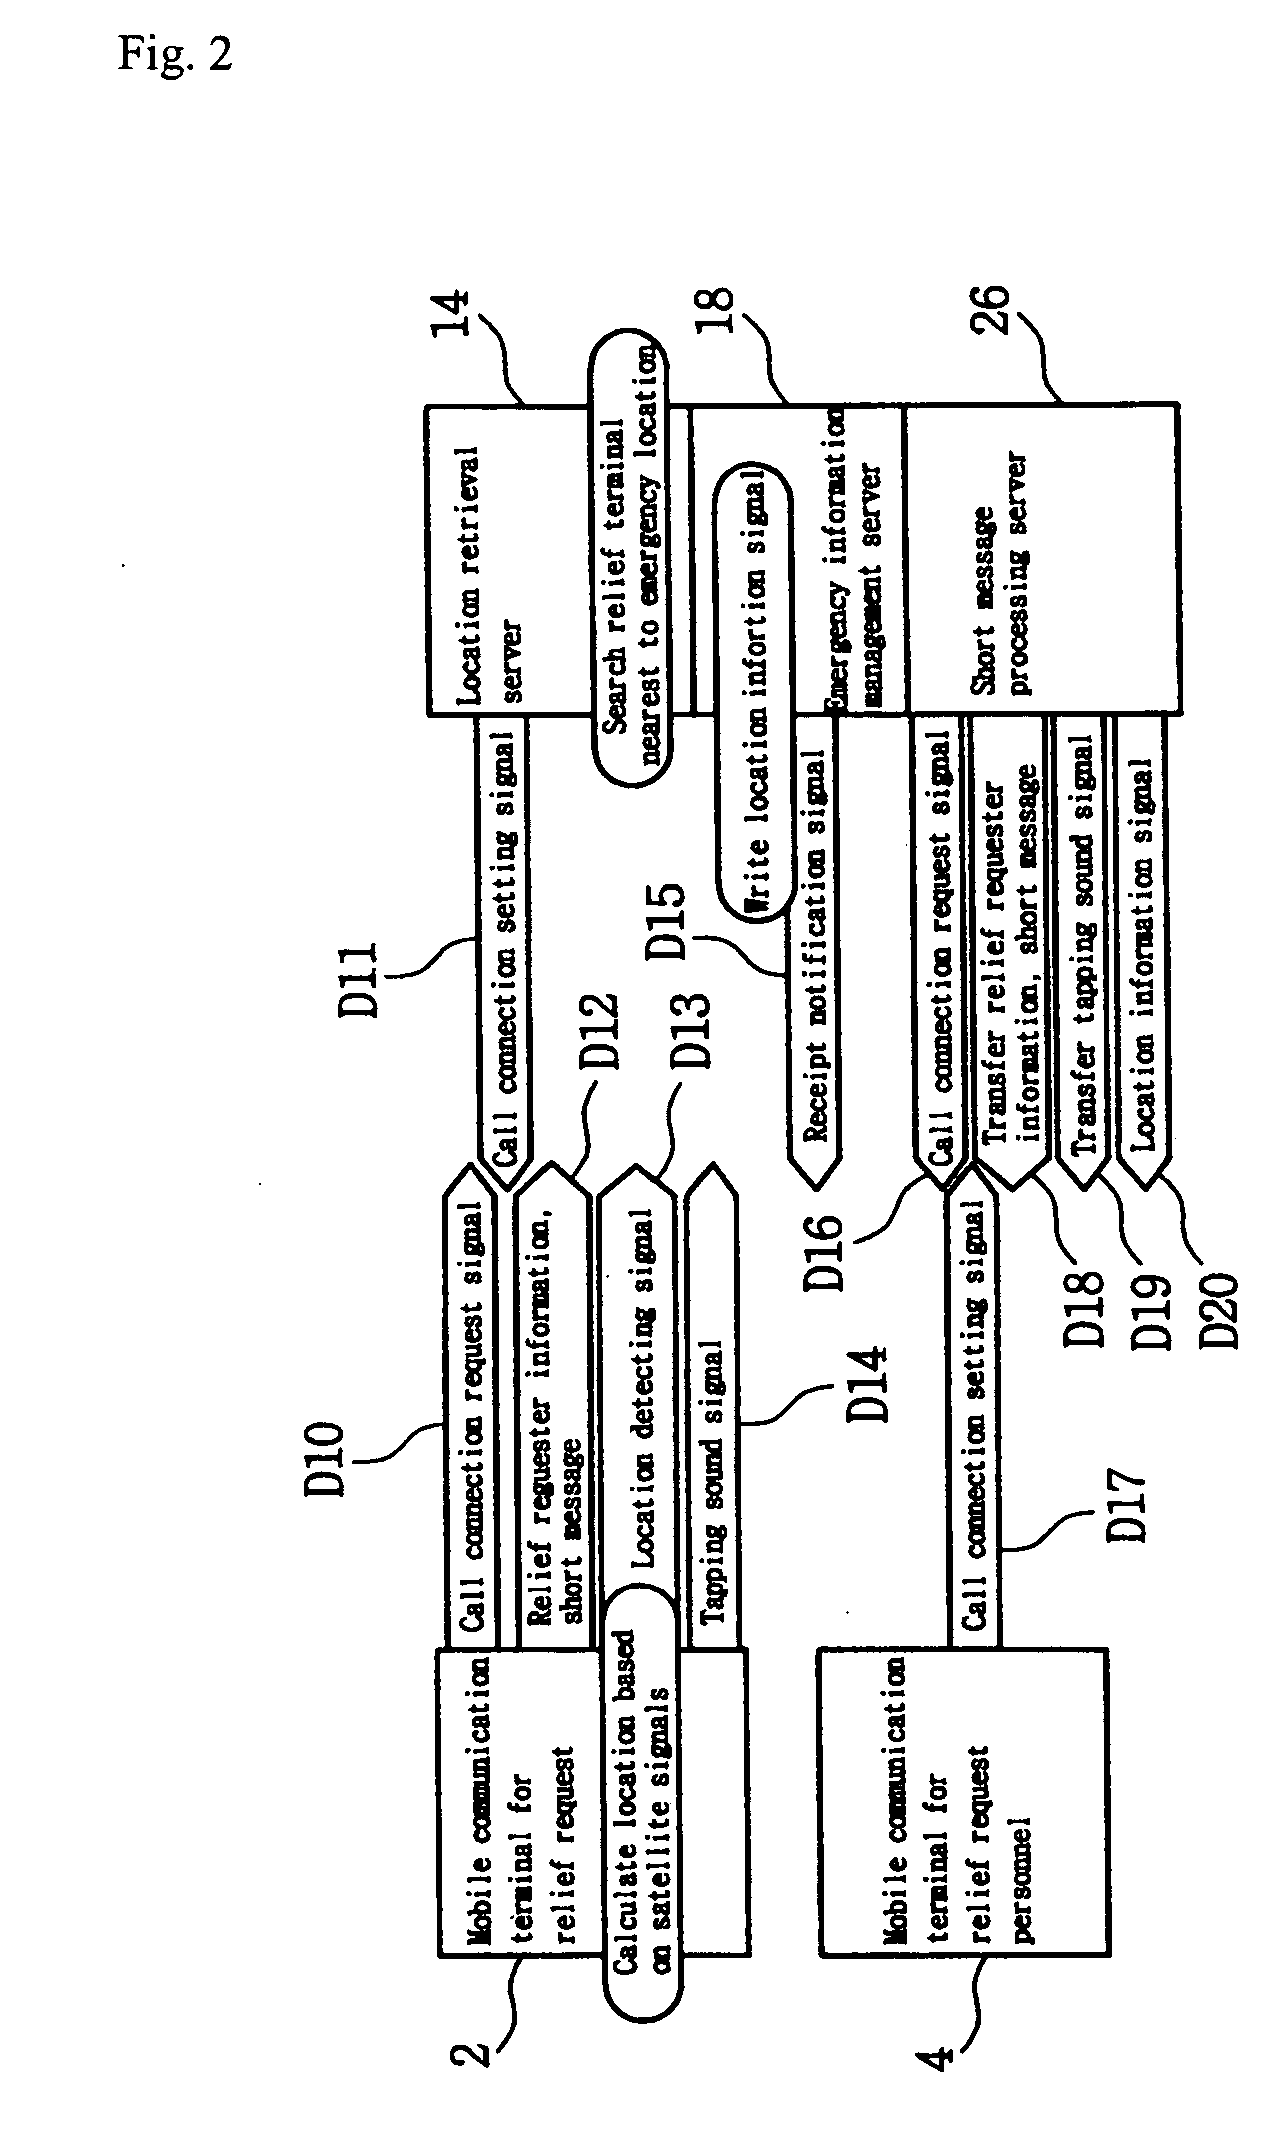 Location information of emergency call providing system using mobile network